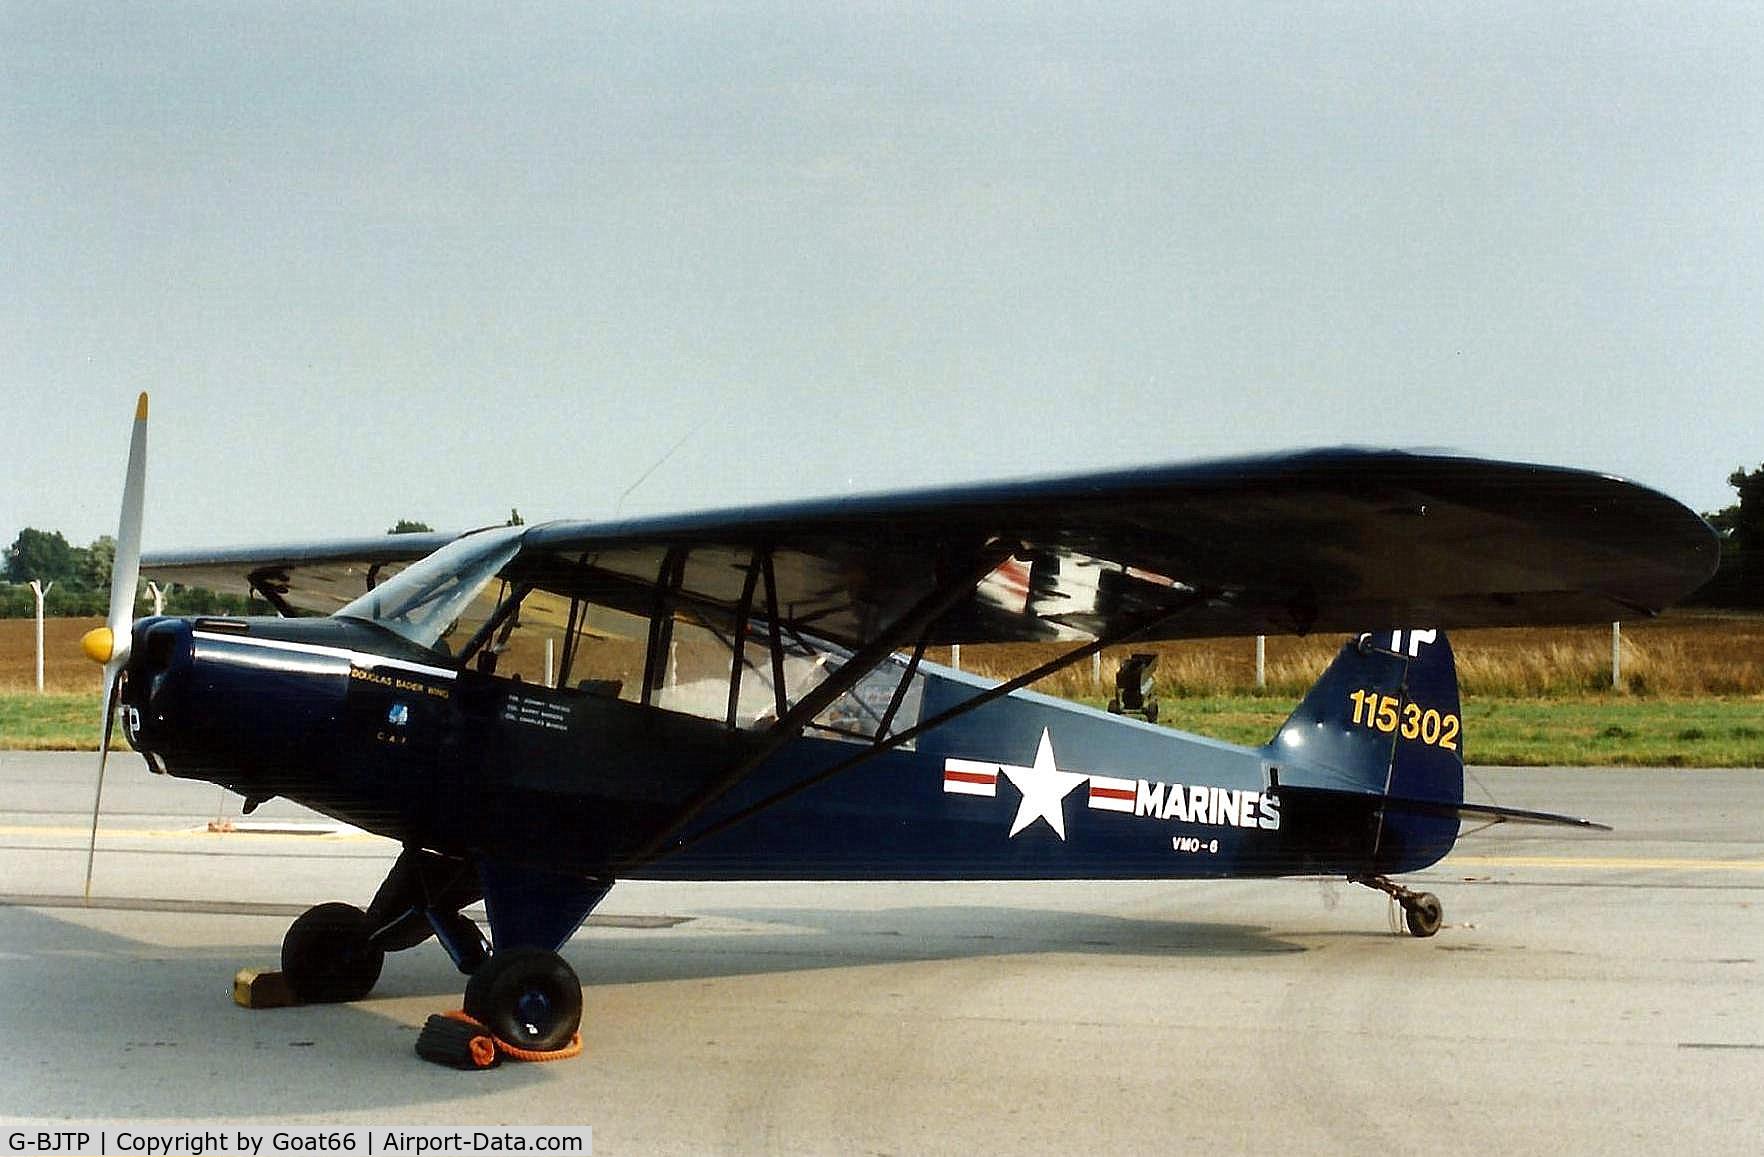 G-BJTP, 1951 Piper L-18C Super Cub (PA-18-95) C/N 18-999, Well known on the UK display circuit, and seen here in cosmetic US Marine Corps colours at IAT 89, RAF Fairford, July 1989